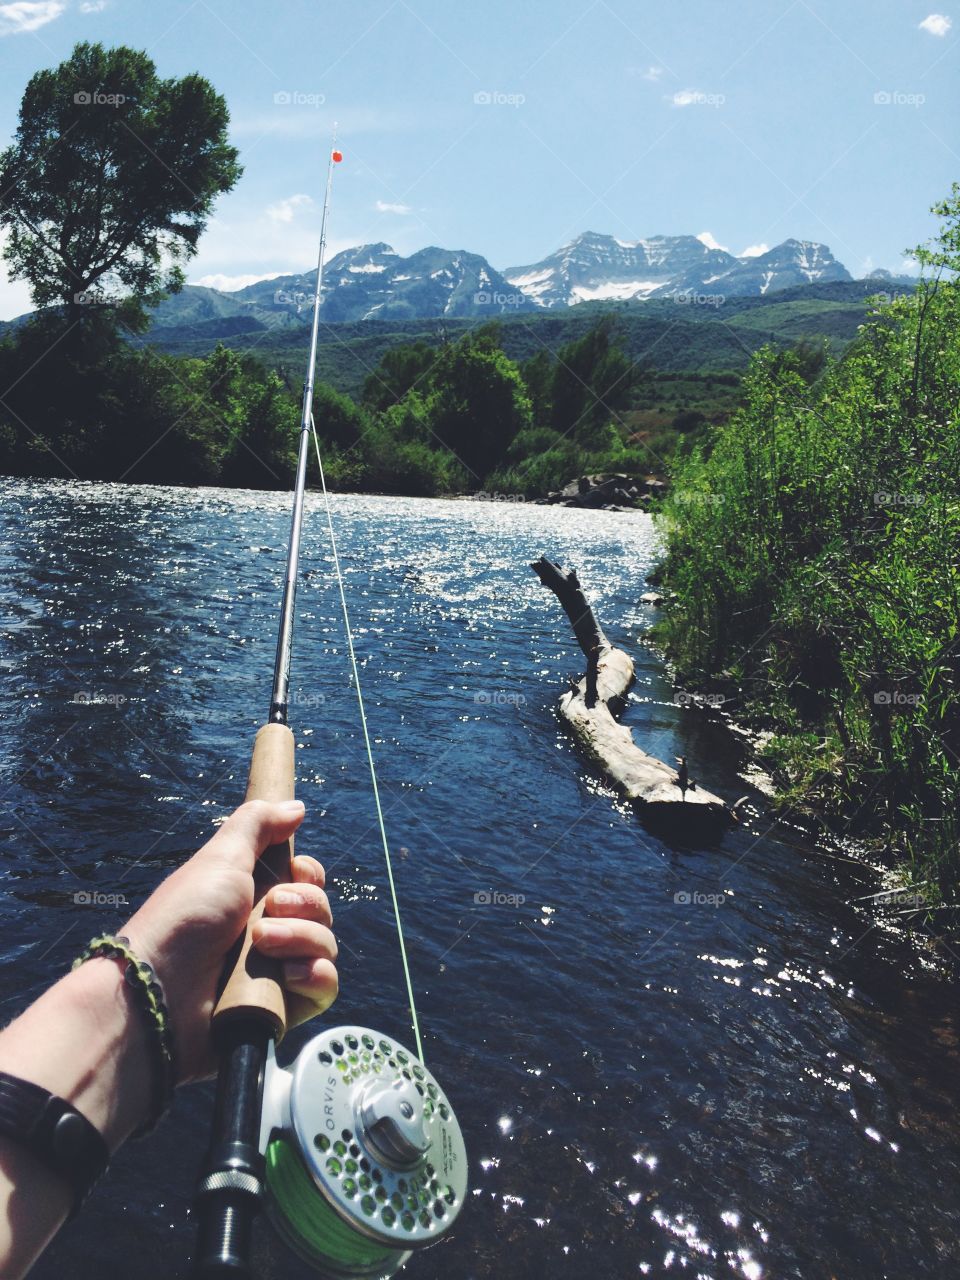 Fly Fishing on the River . Fly Fishing on the Provo River in Utah 